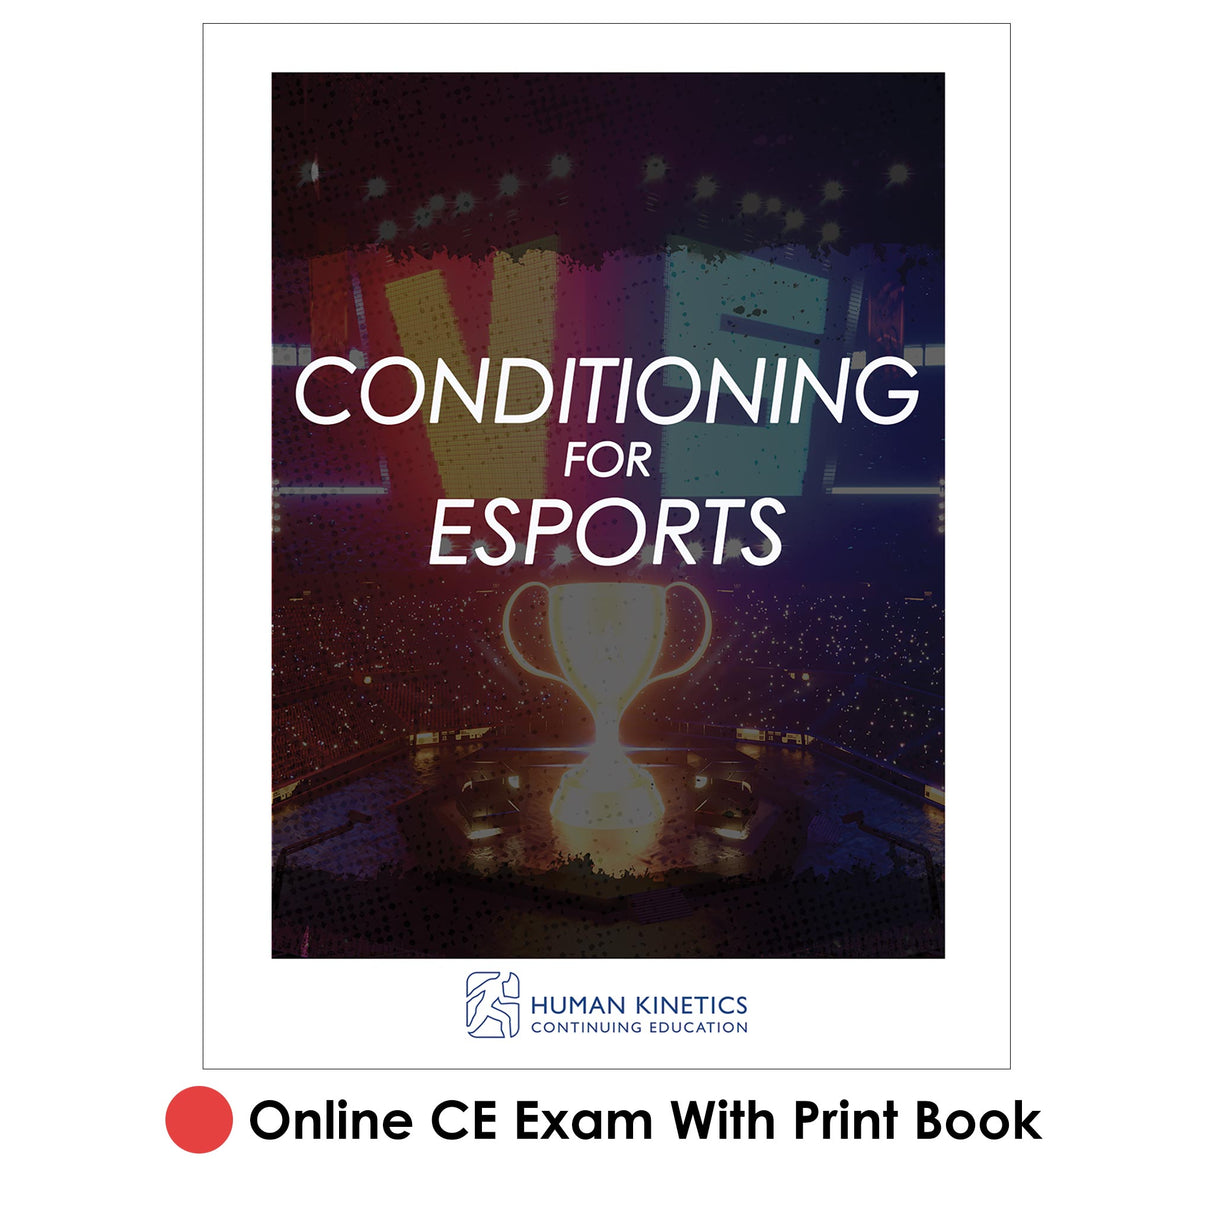 Conditioning for Esports Online CE Exam With Print Book